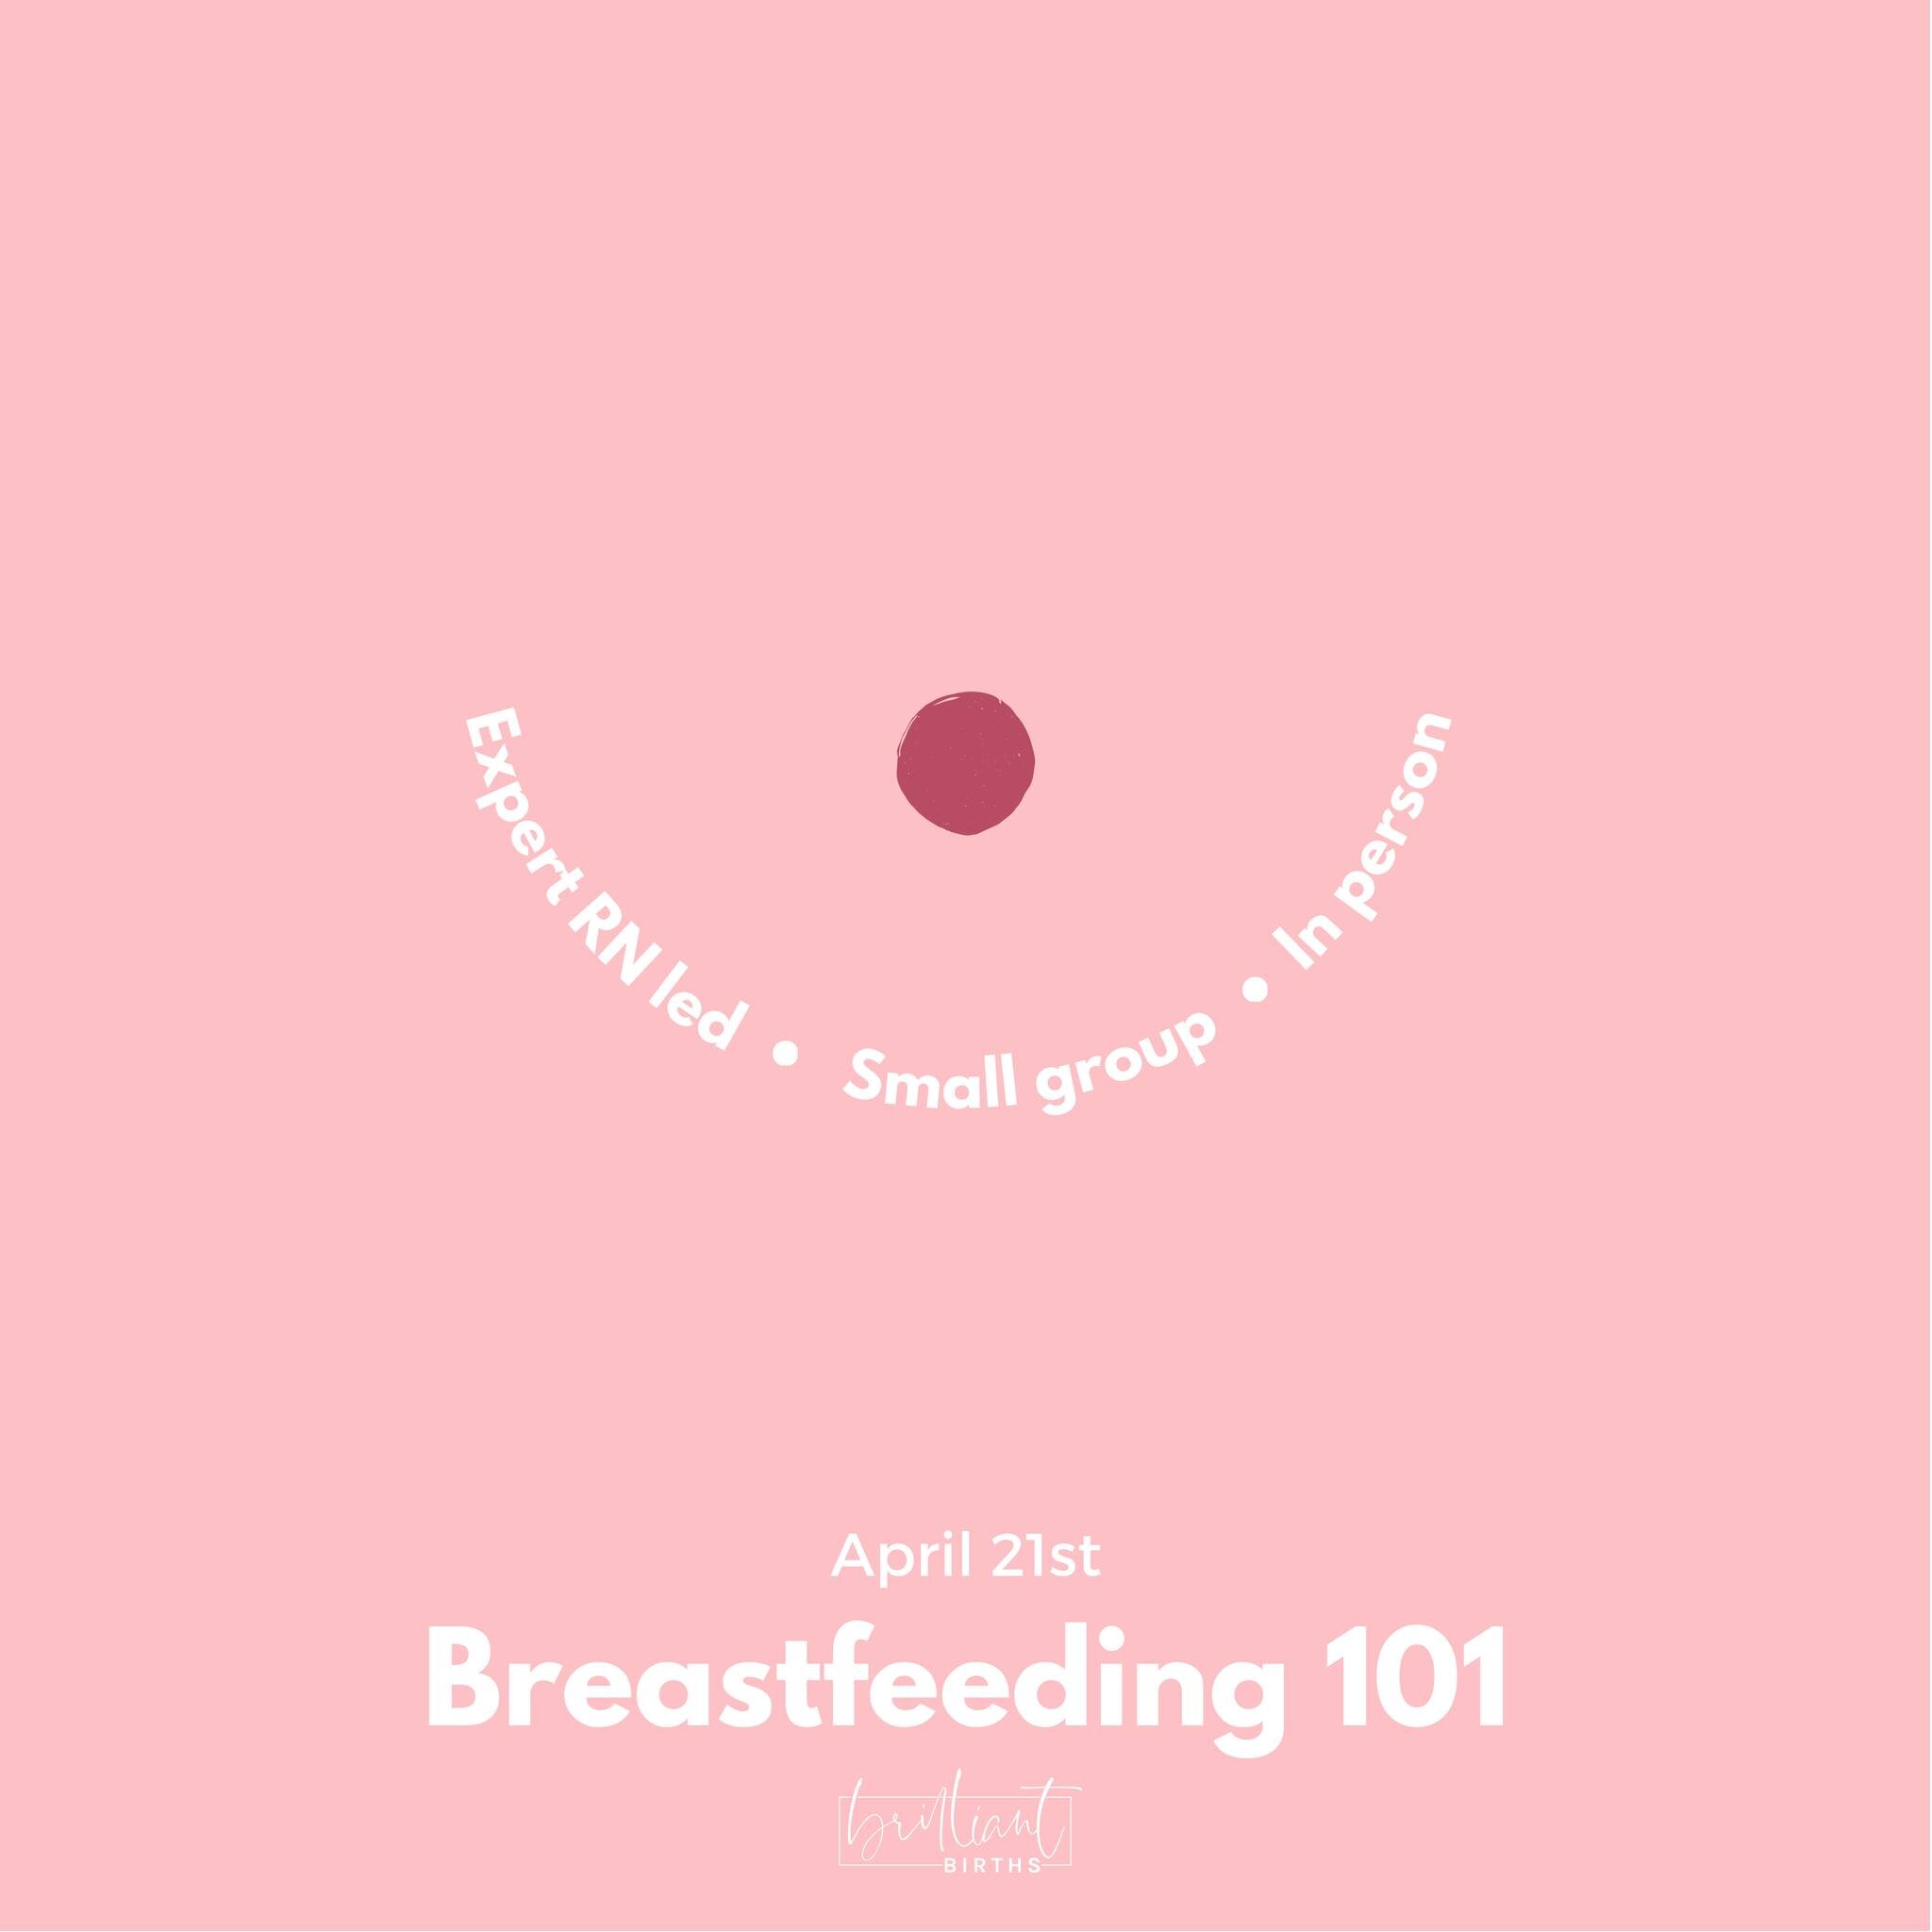 We found the best certified lactation coach (she's also an RN!), and she's running our small group, personalized breastfeeding classes. In-person means better adjustments for the right hold, demonstrations of a proper latch from every angle, and an e